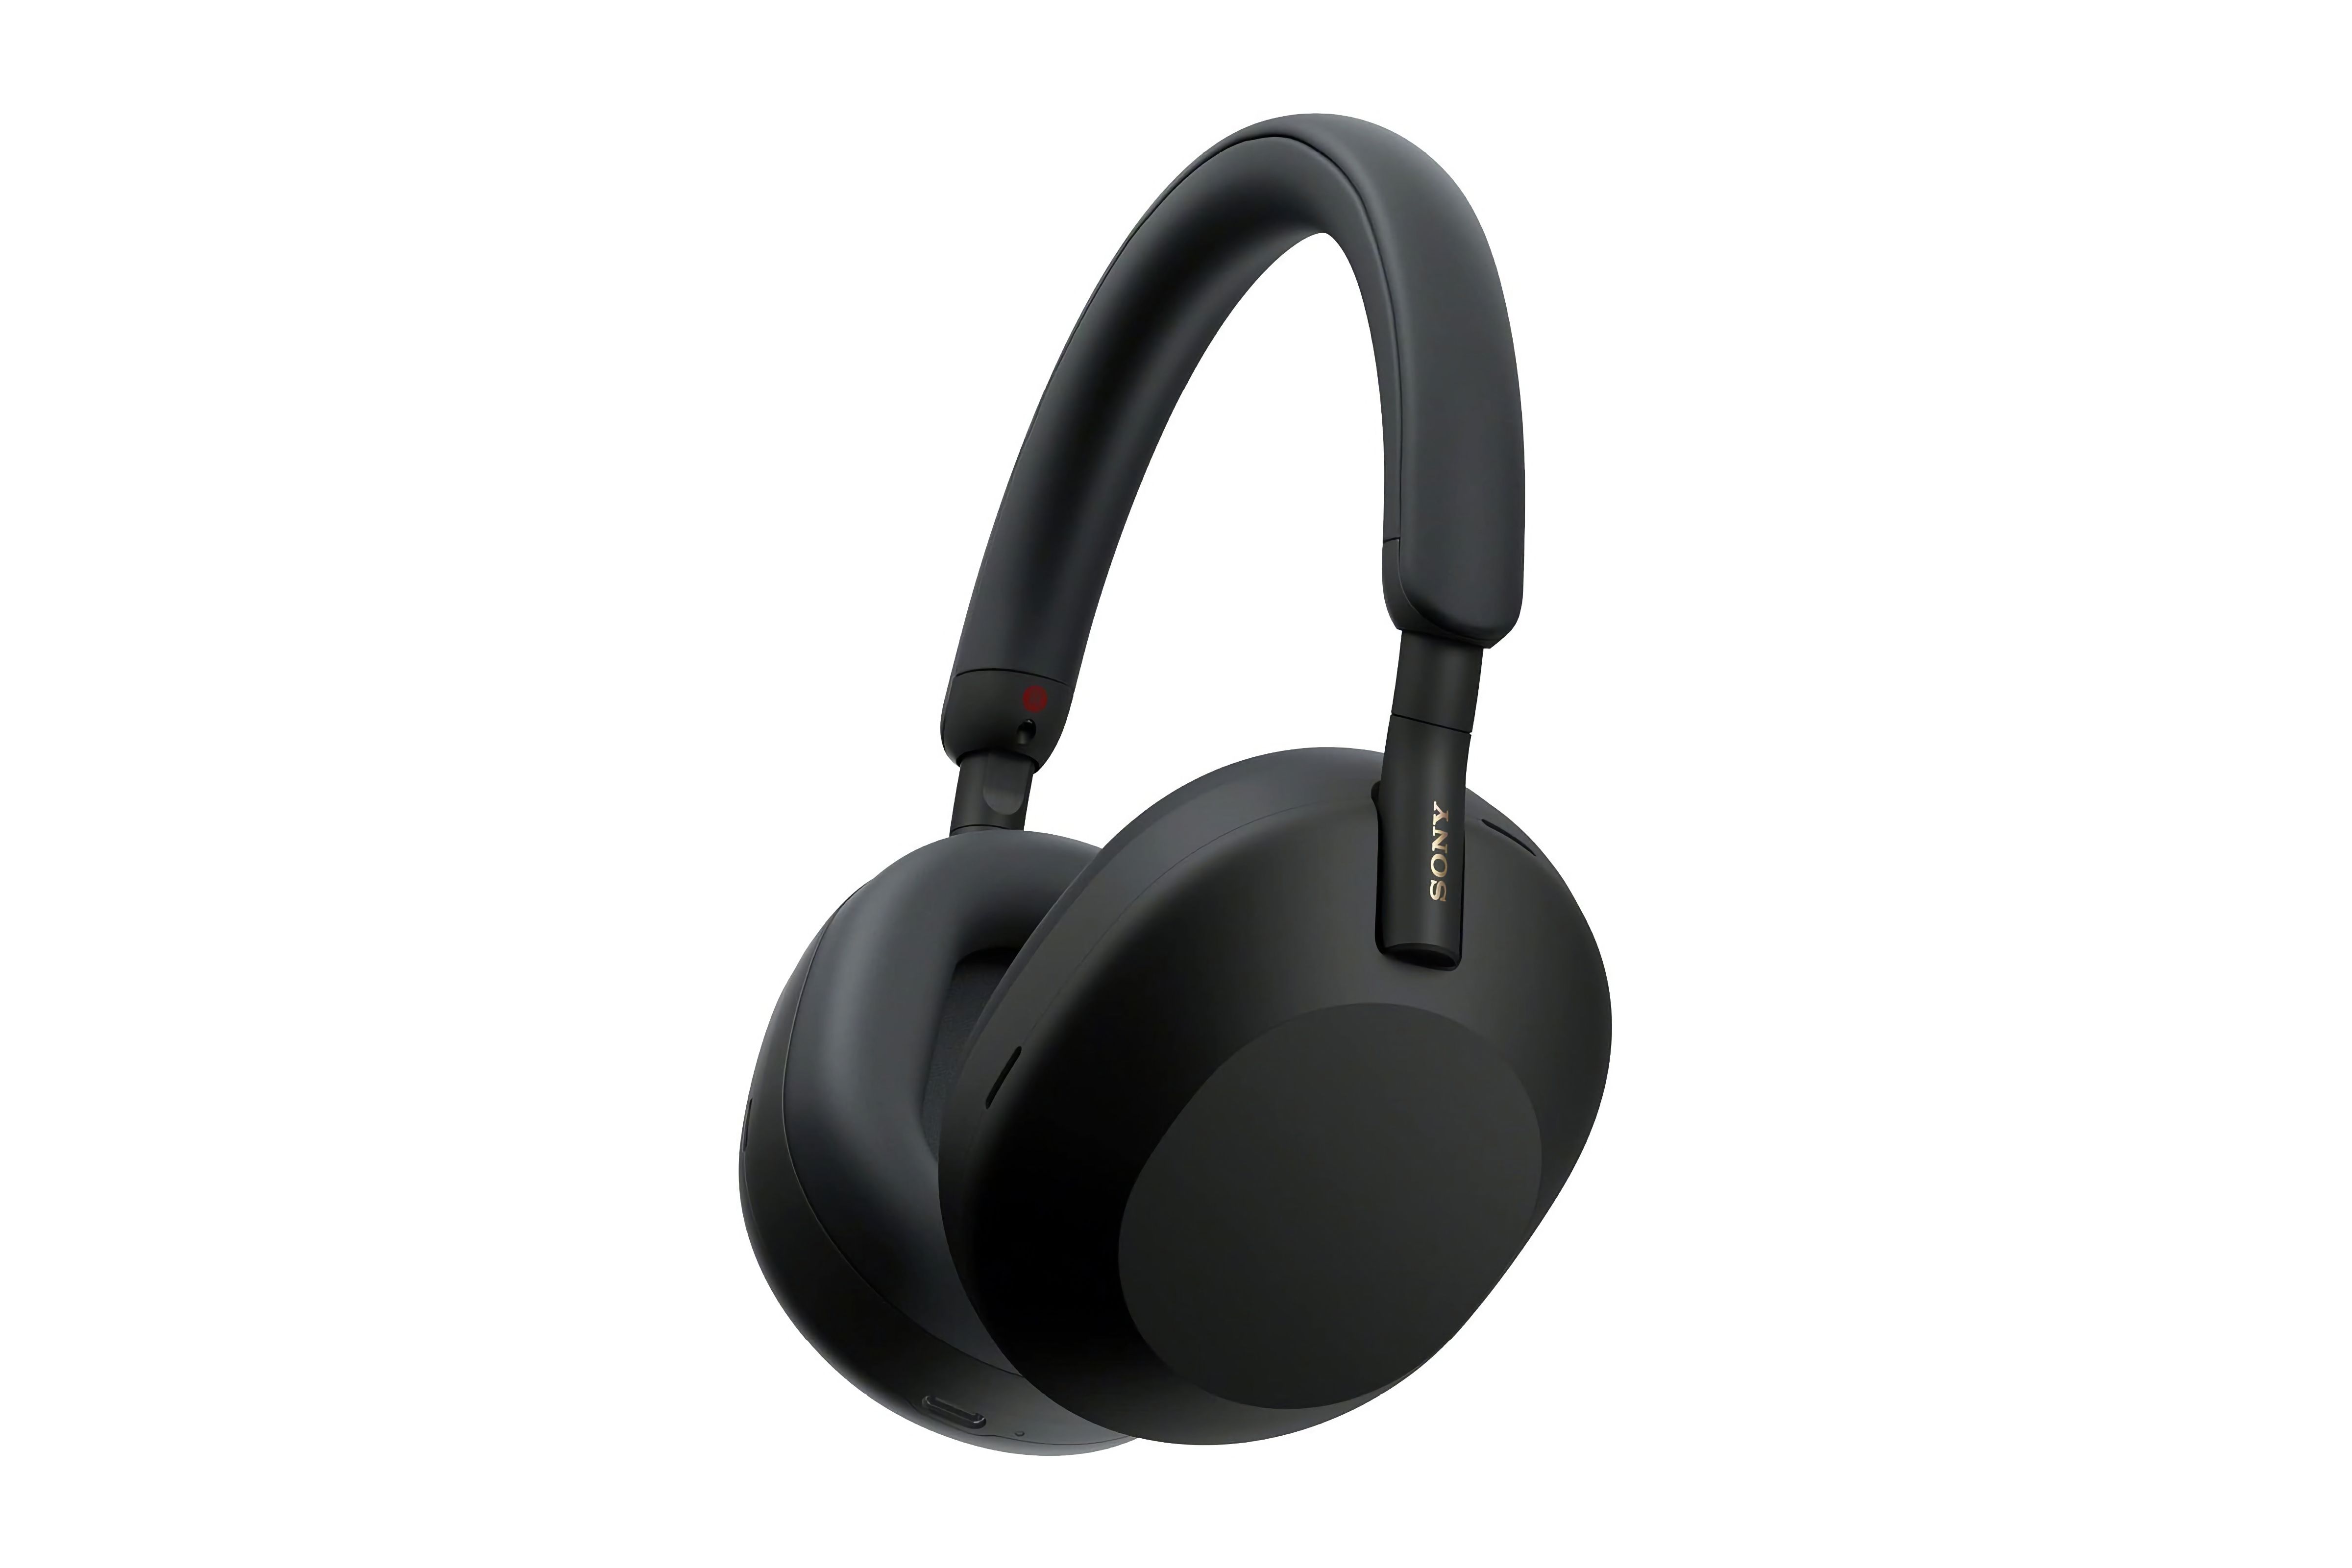 Black Sony over-ear headphones with large round ear cups.